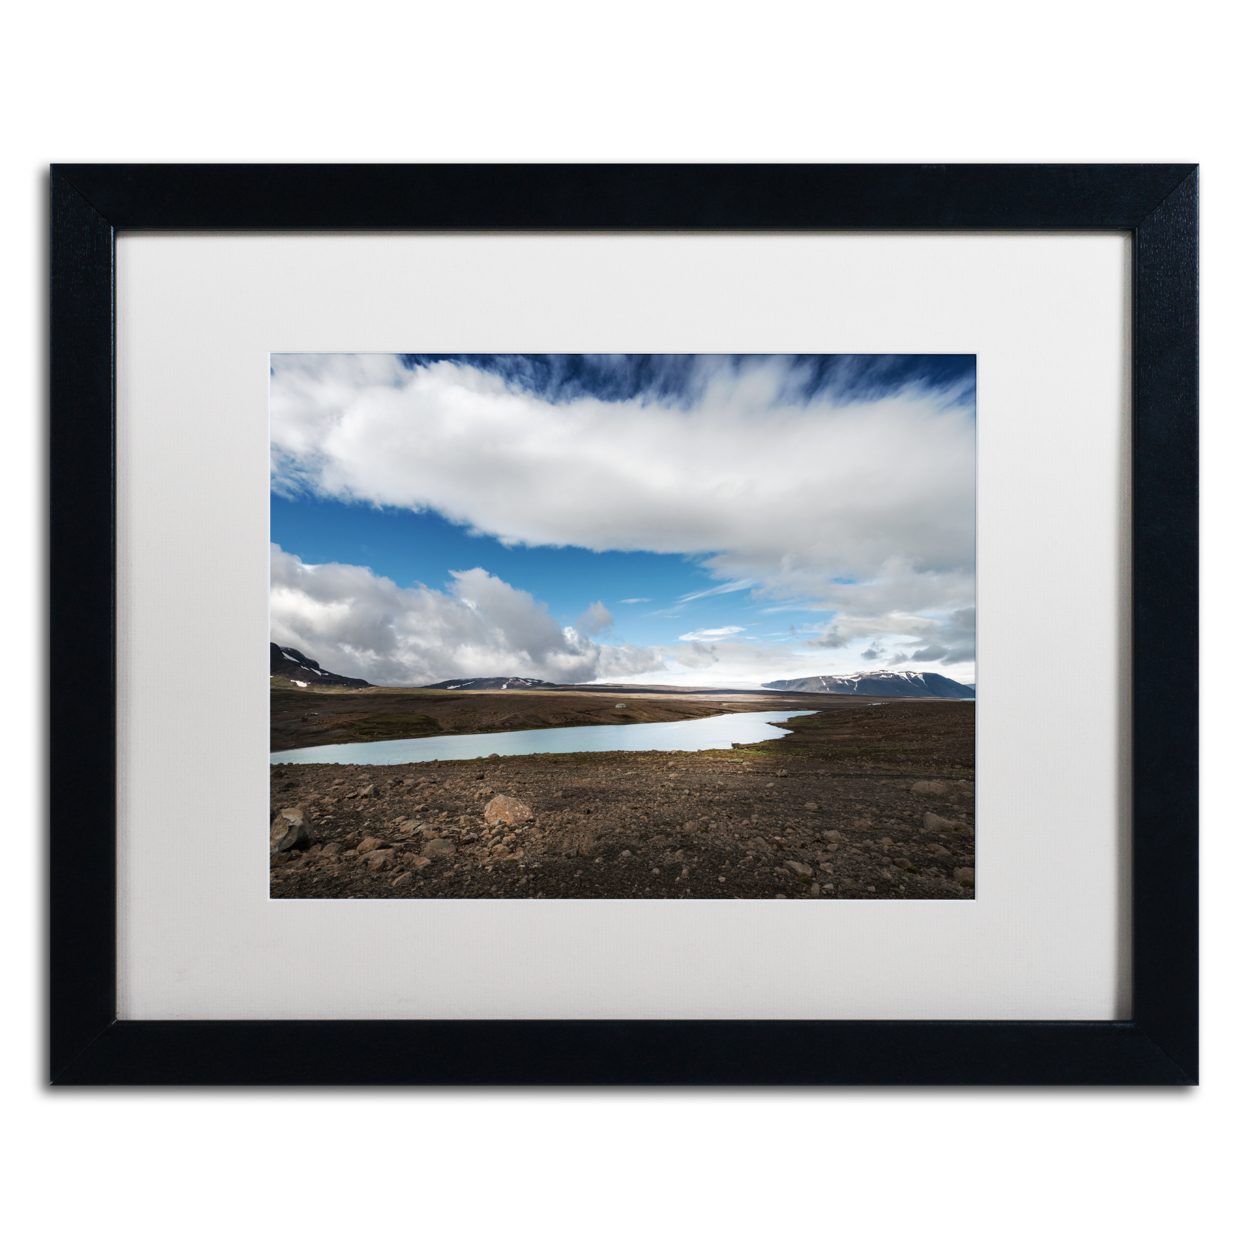 Philippe Sainte-Laudy 'Icelandic Silence' Black Wooden Framed Art 18 X 22 Inches